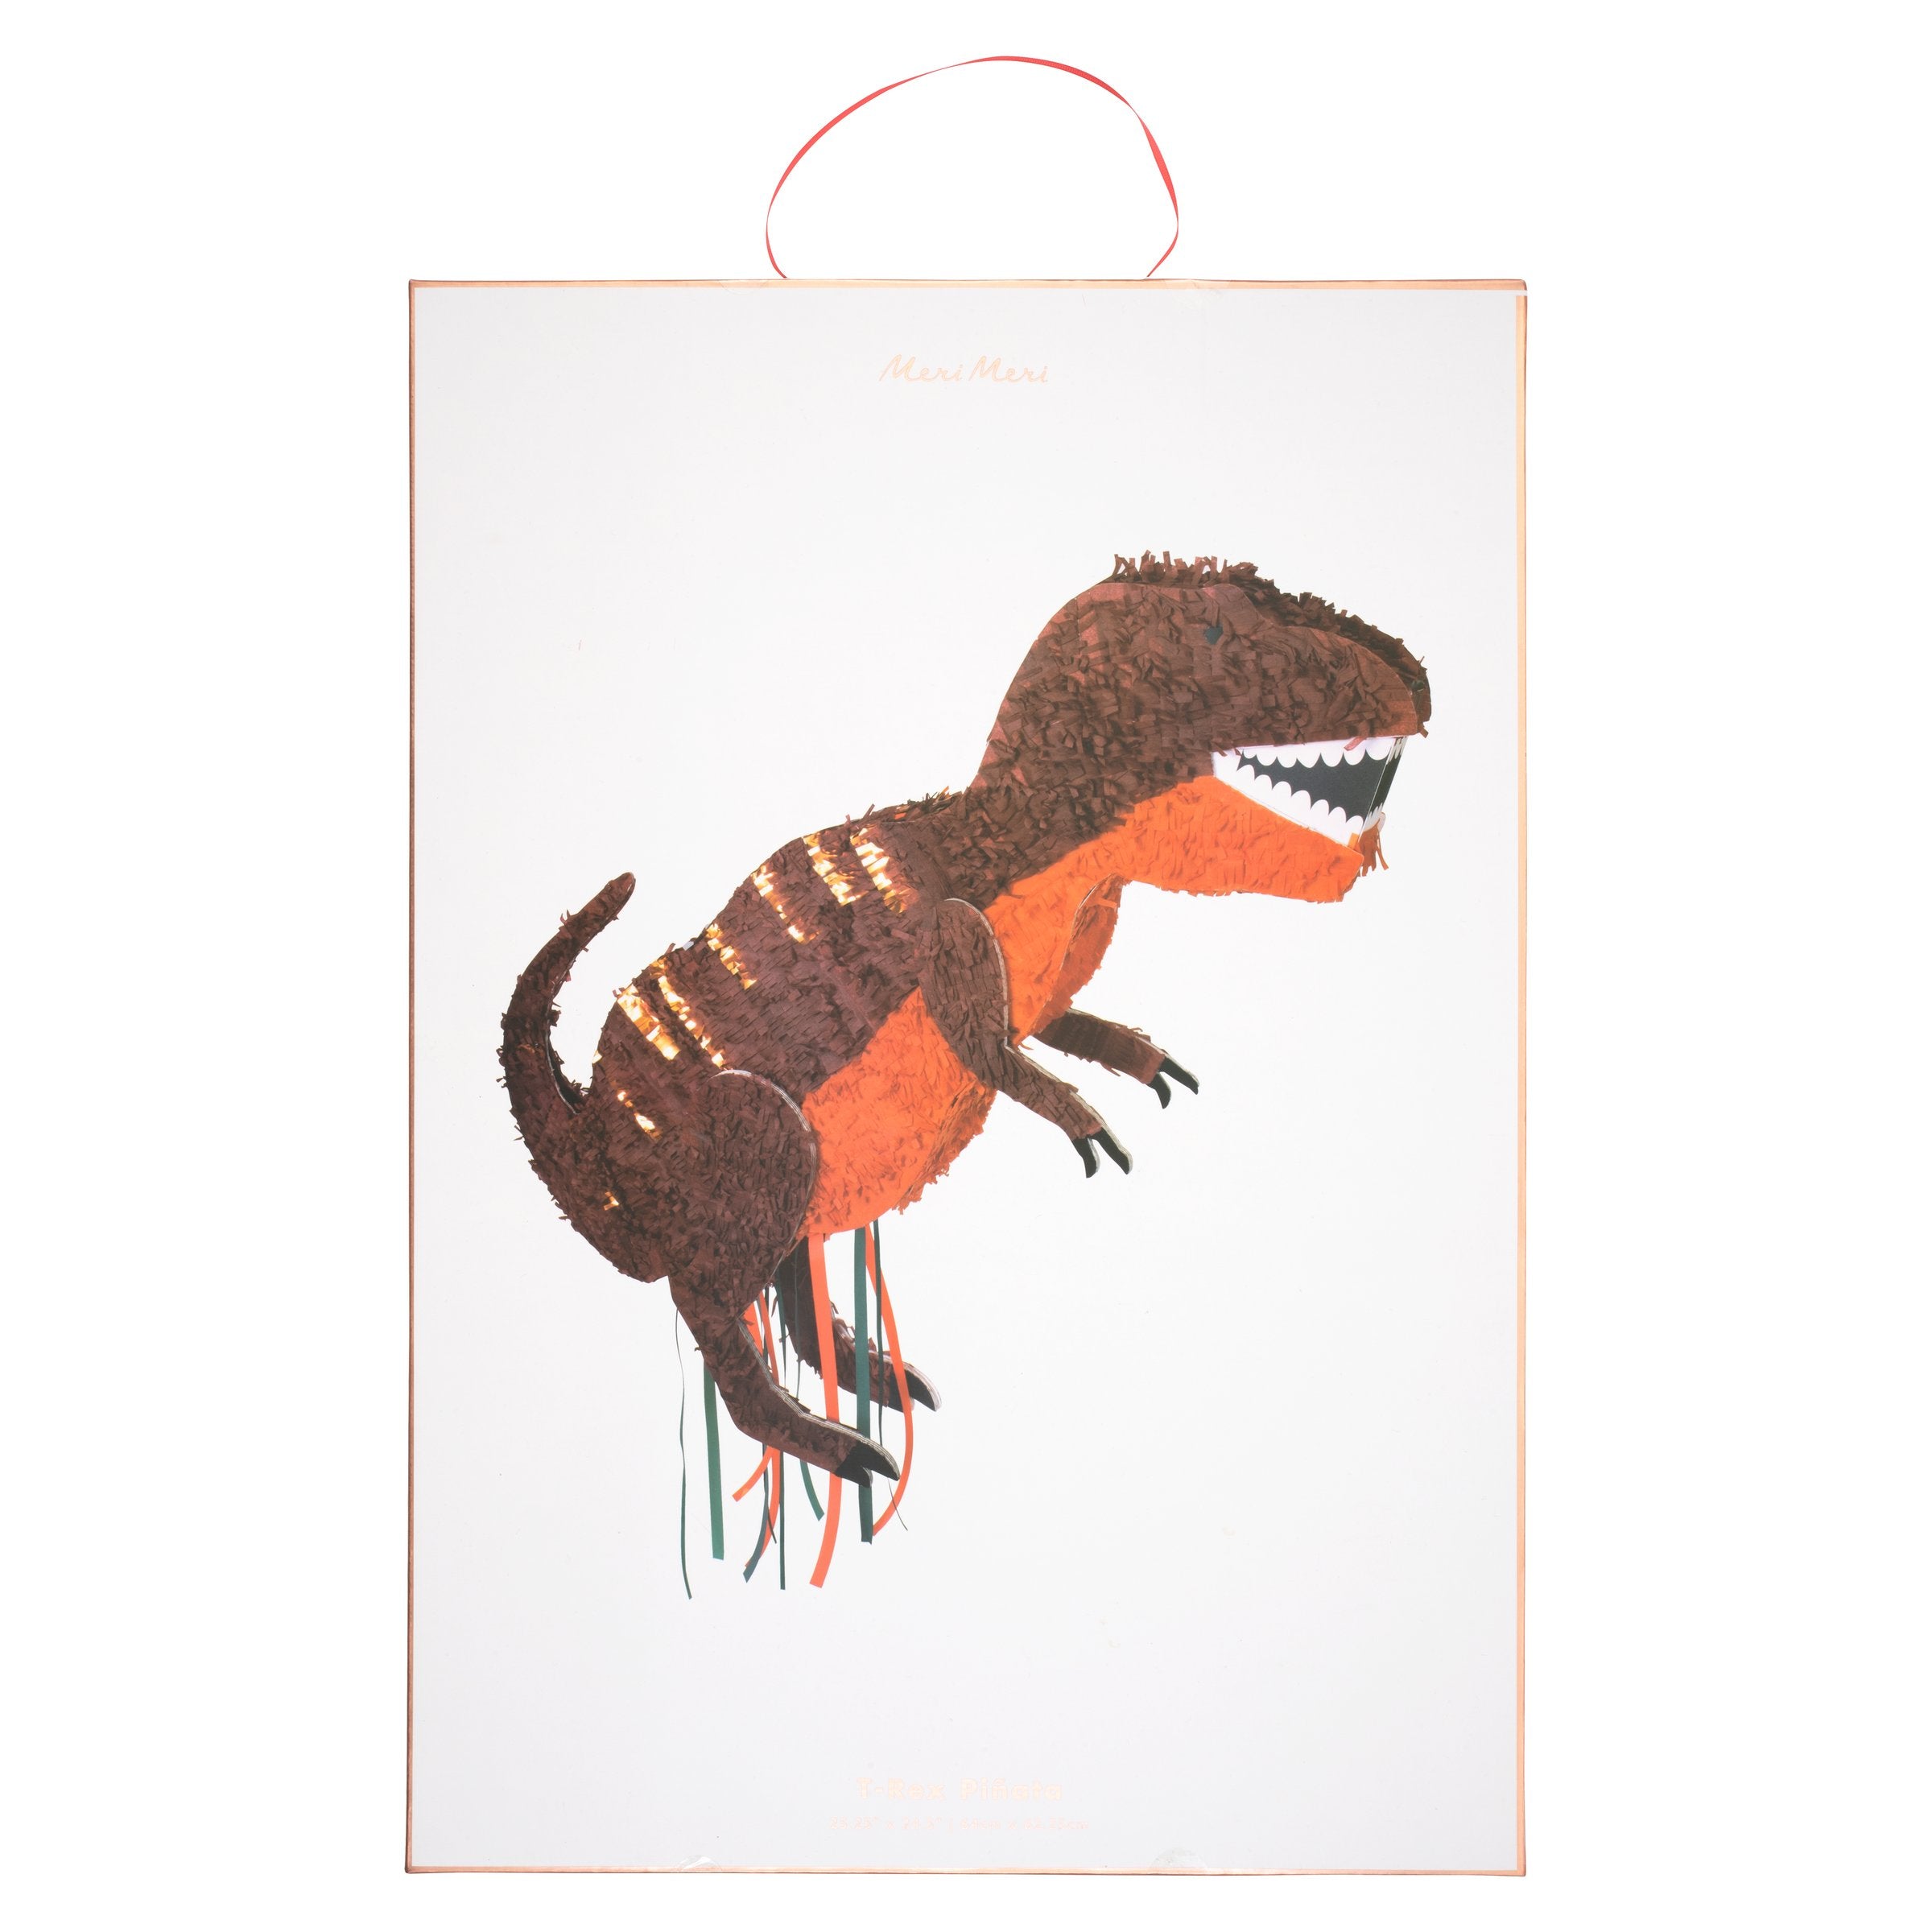 Our dinosaur piñata is crafted in the shape of a T-Rex, perfect to add to your dinosaur party supplies.